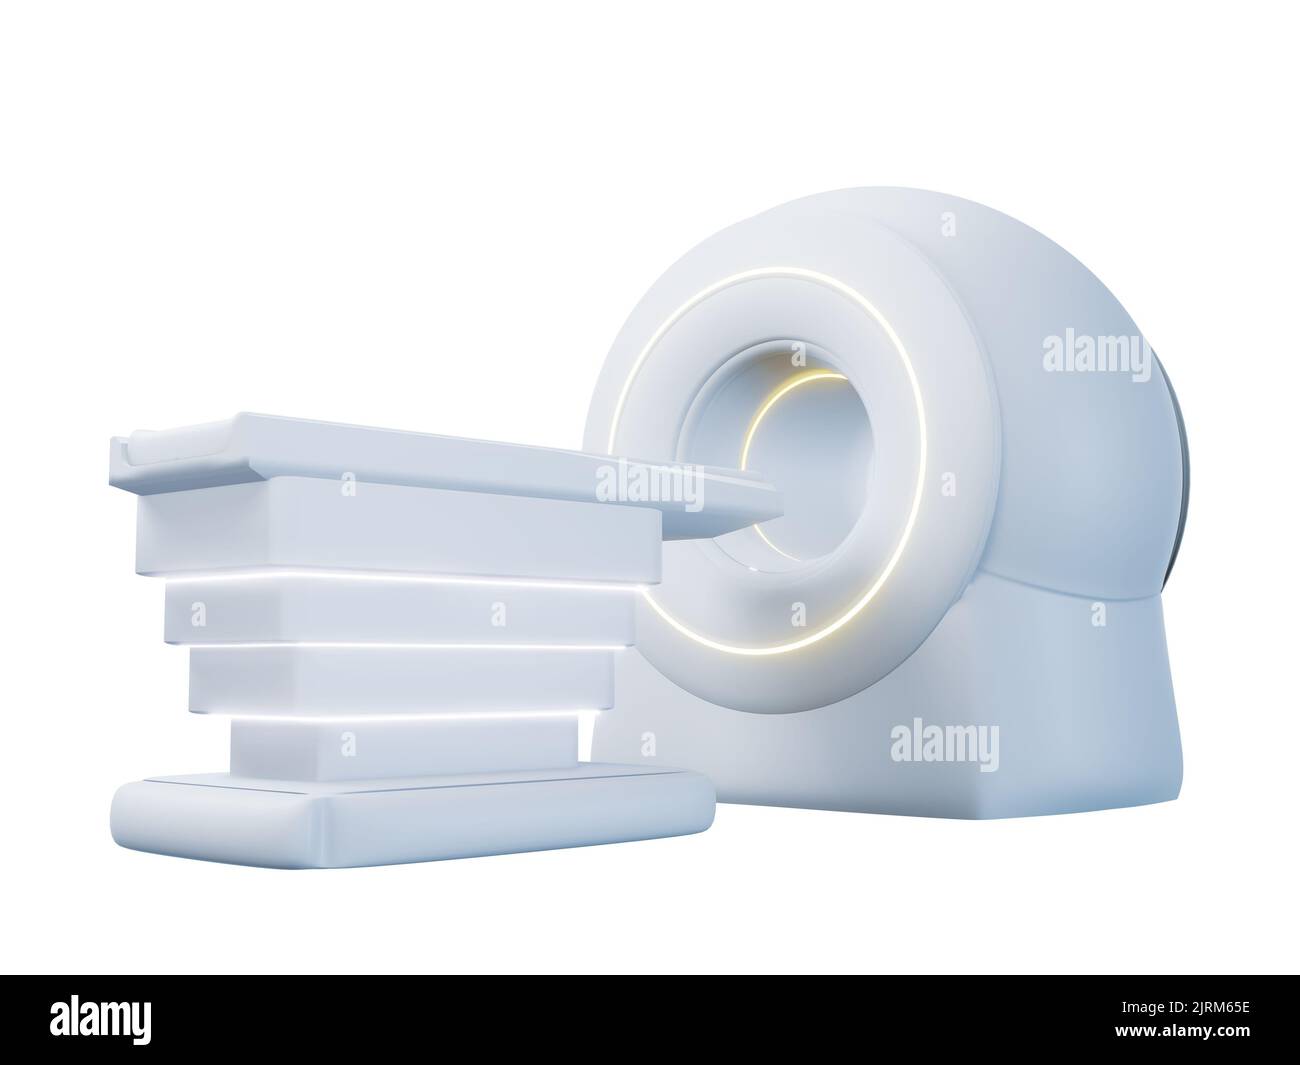 MRI SCANNER - Magnetic resonance imaging scan device in Hospital 3D rendering isolated onwhite background  . Medical Equipment and Health Care.Clippin Stock Photo